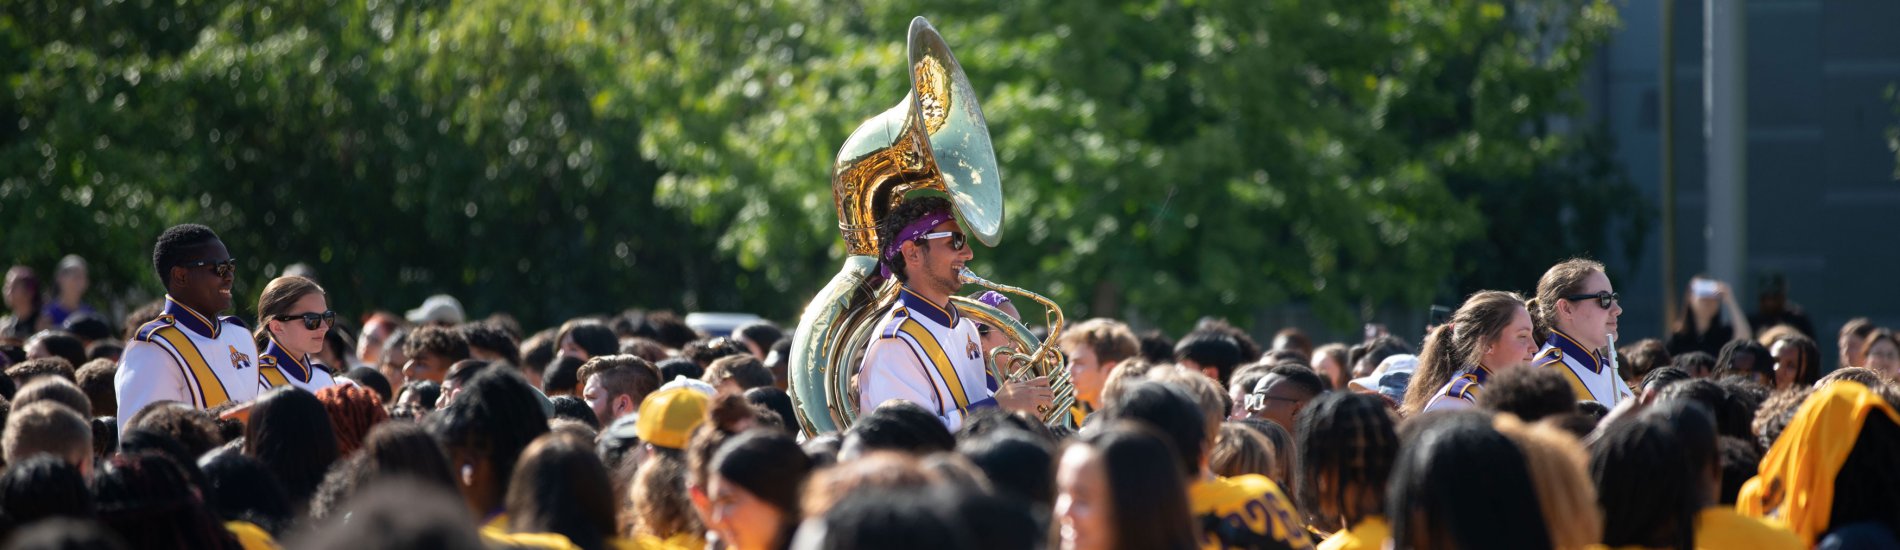 A tuba player in the UAlbany Marching Band walks through a crowd of students in yellow t-shirts.